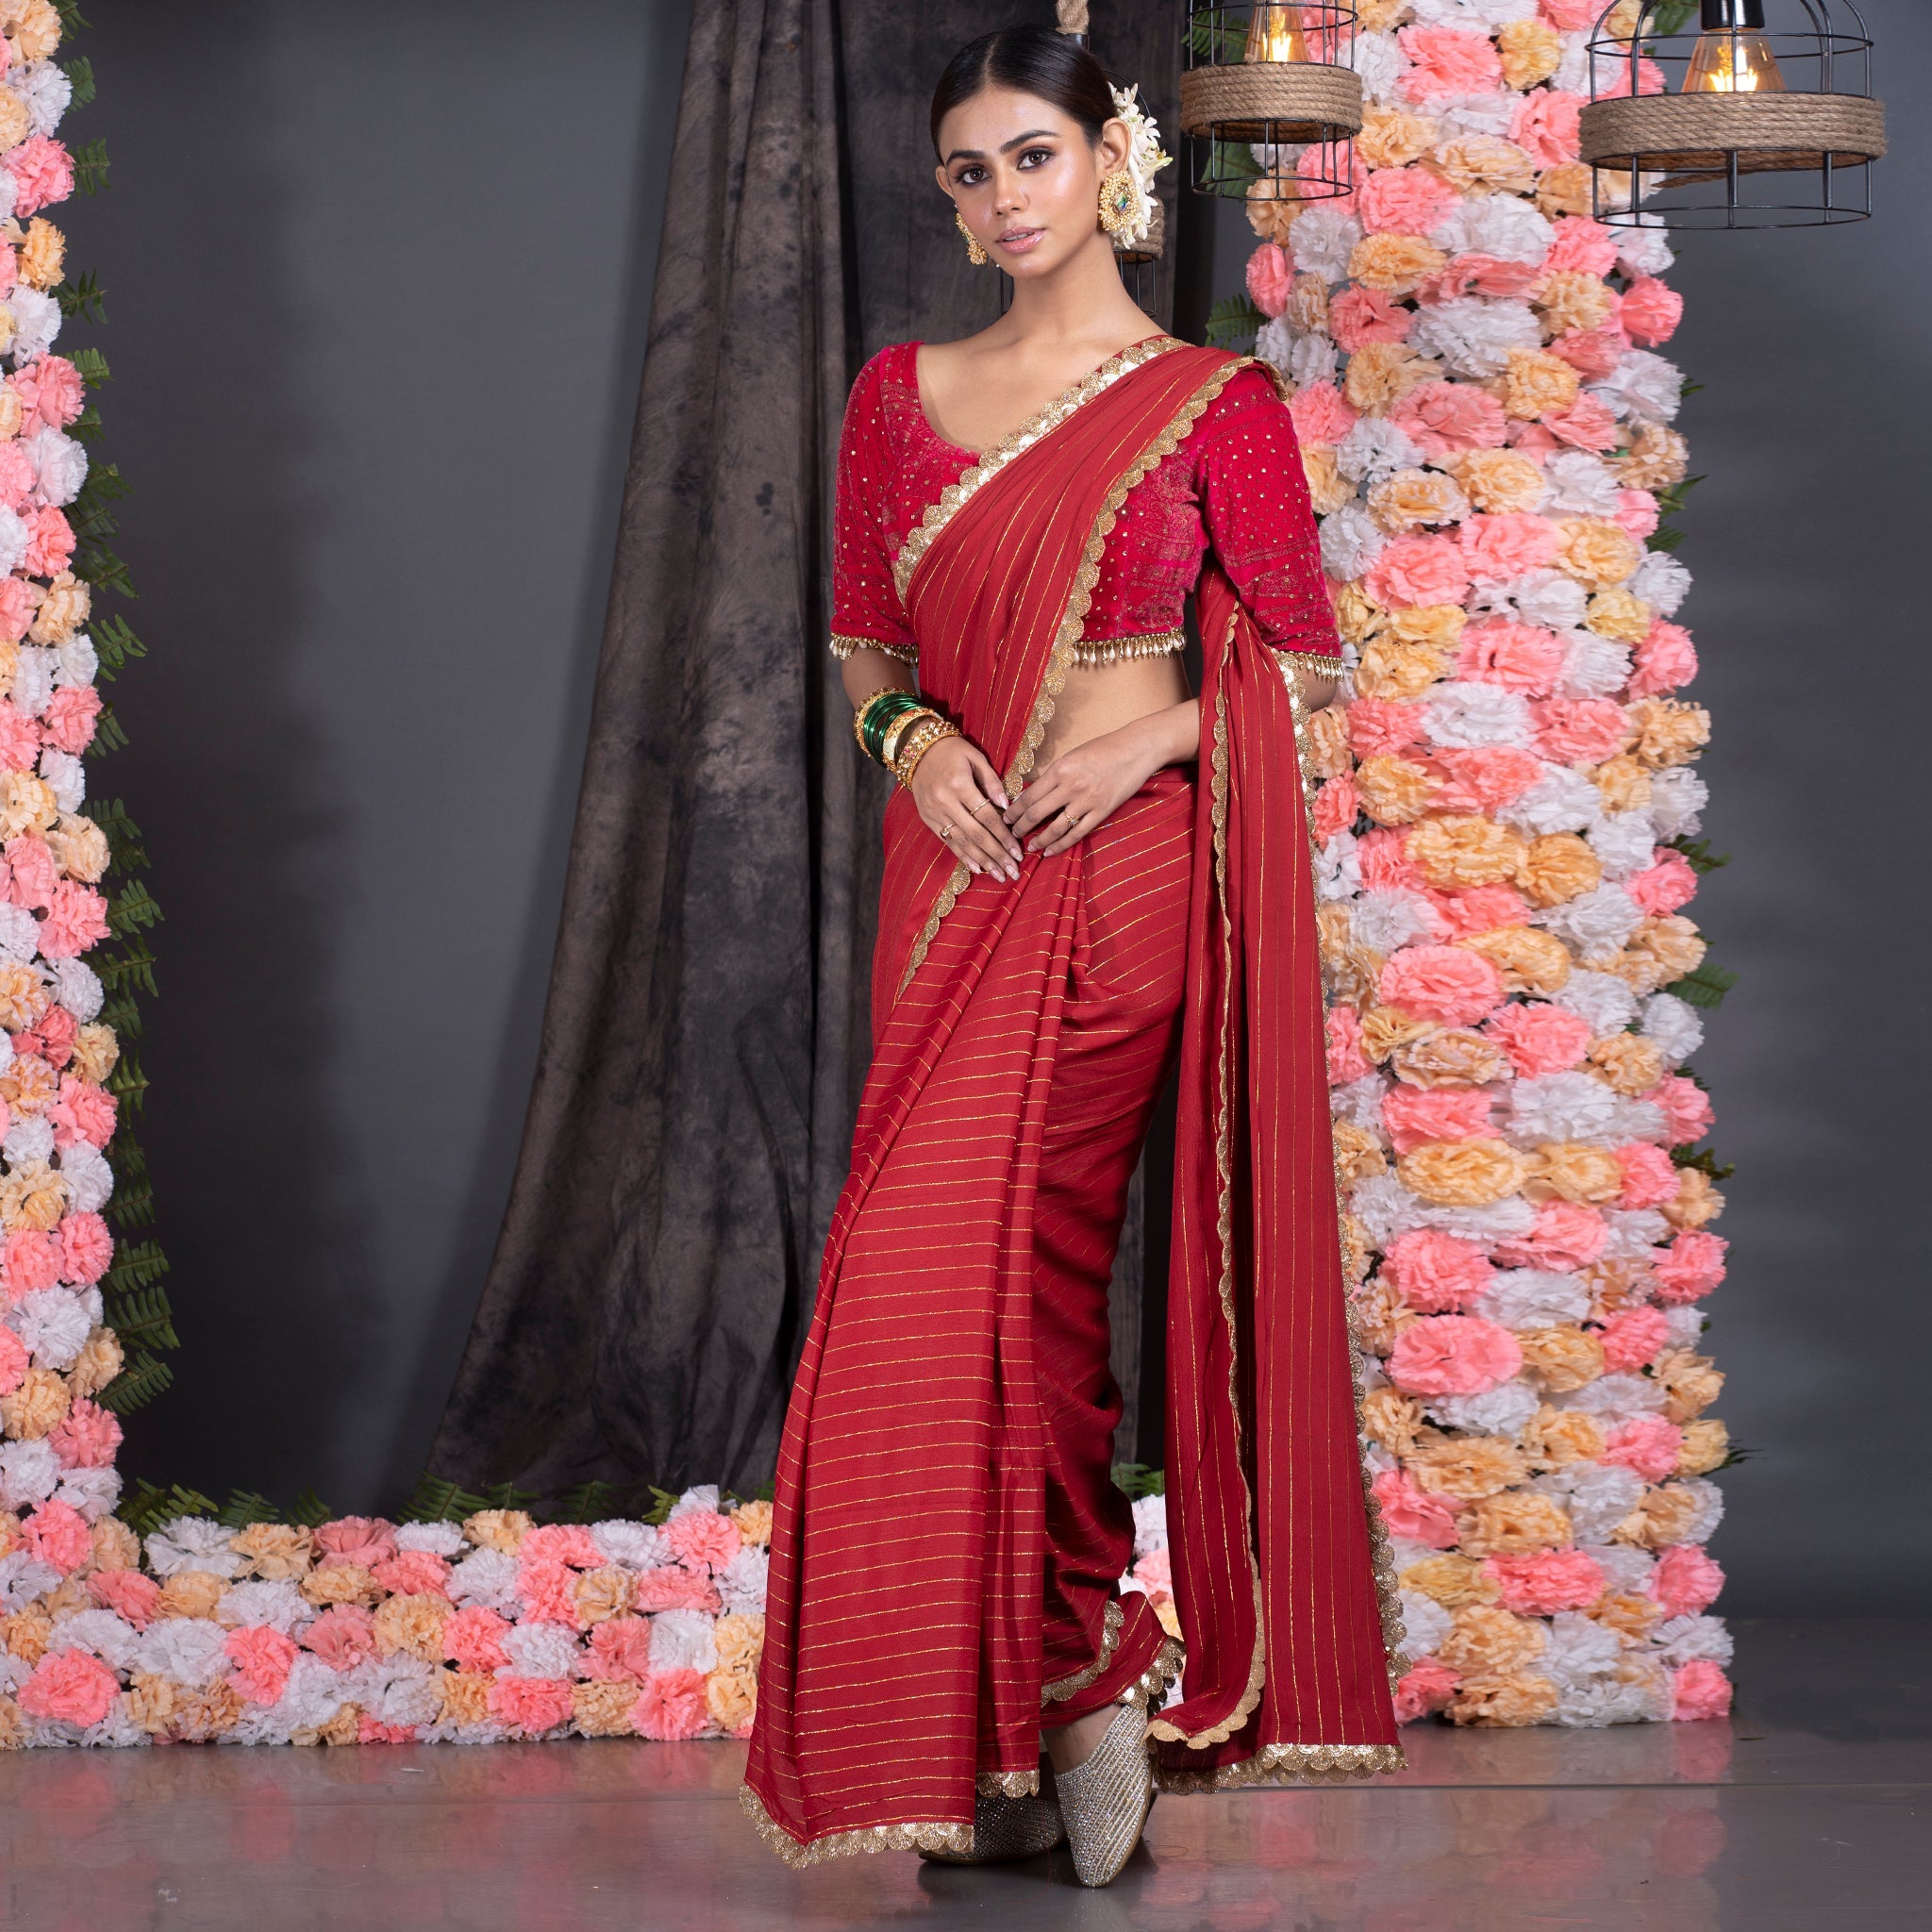 Women's Maroon Georgette Saree With Lurex Gold Stripes And Scallop Embroidered Border - Boveee